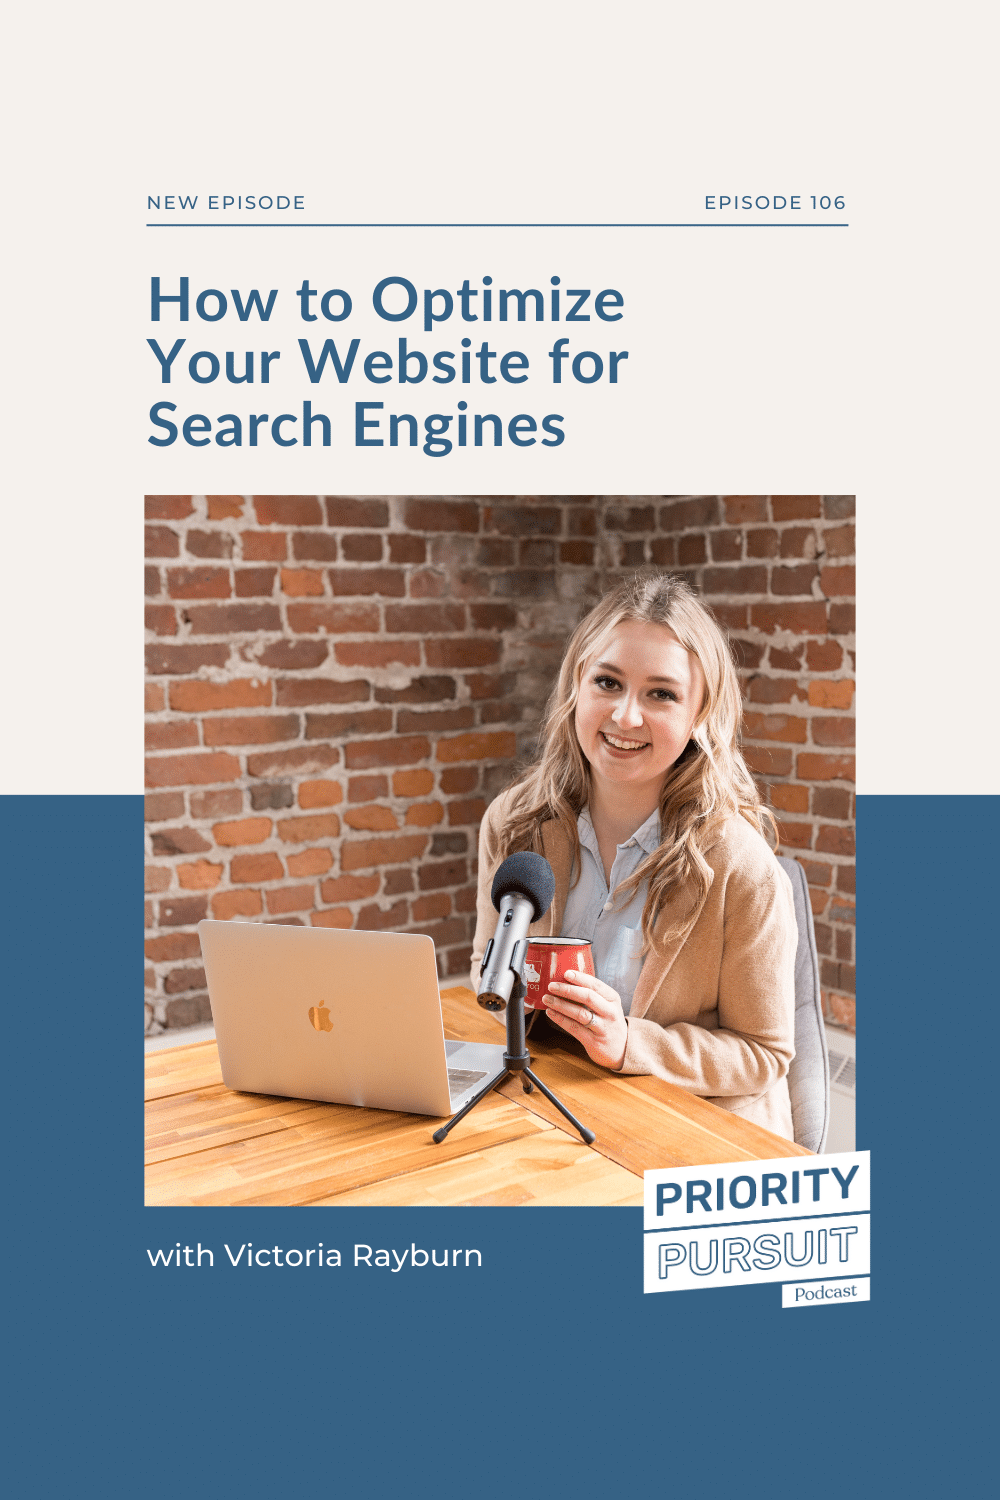 Learn how to optimize your website for search engines with these steps and tools from “The Priority Pursuit Podcast”!